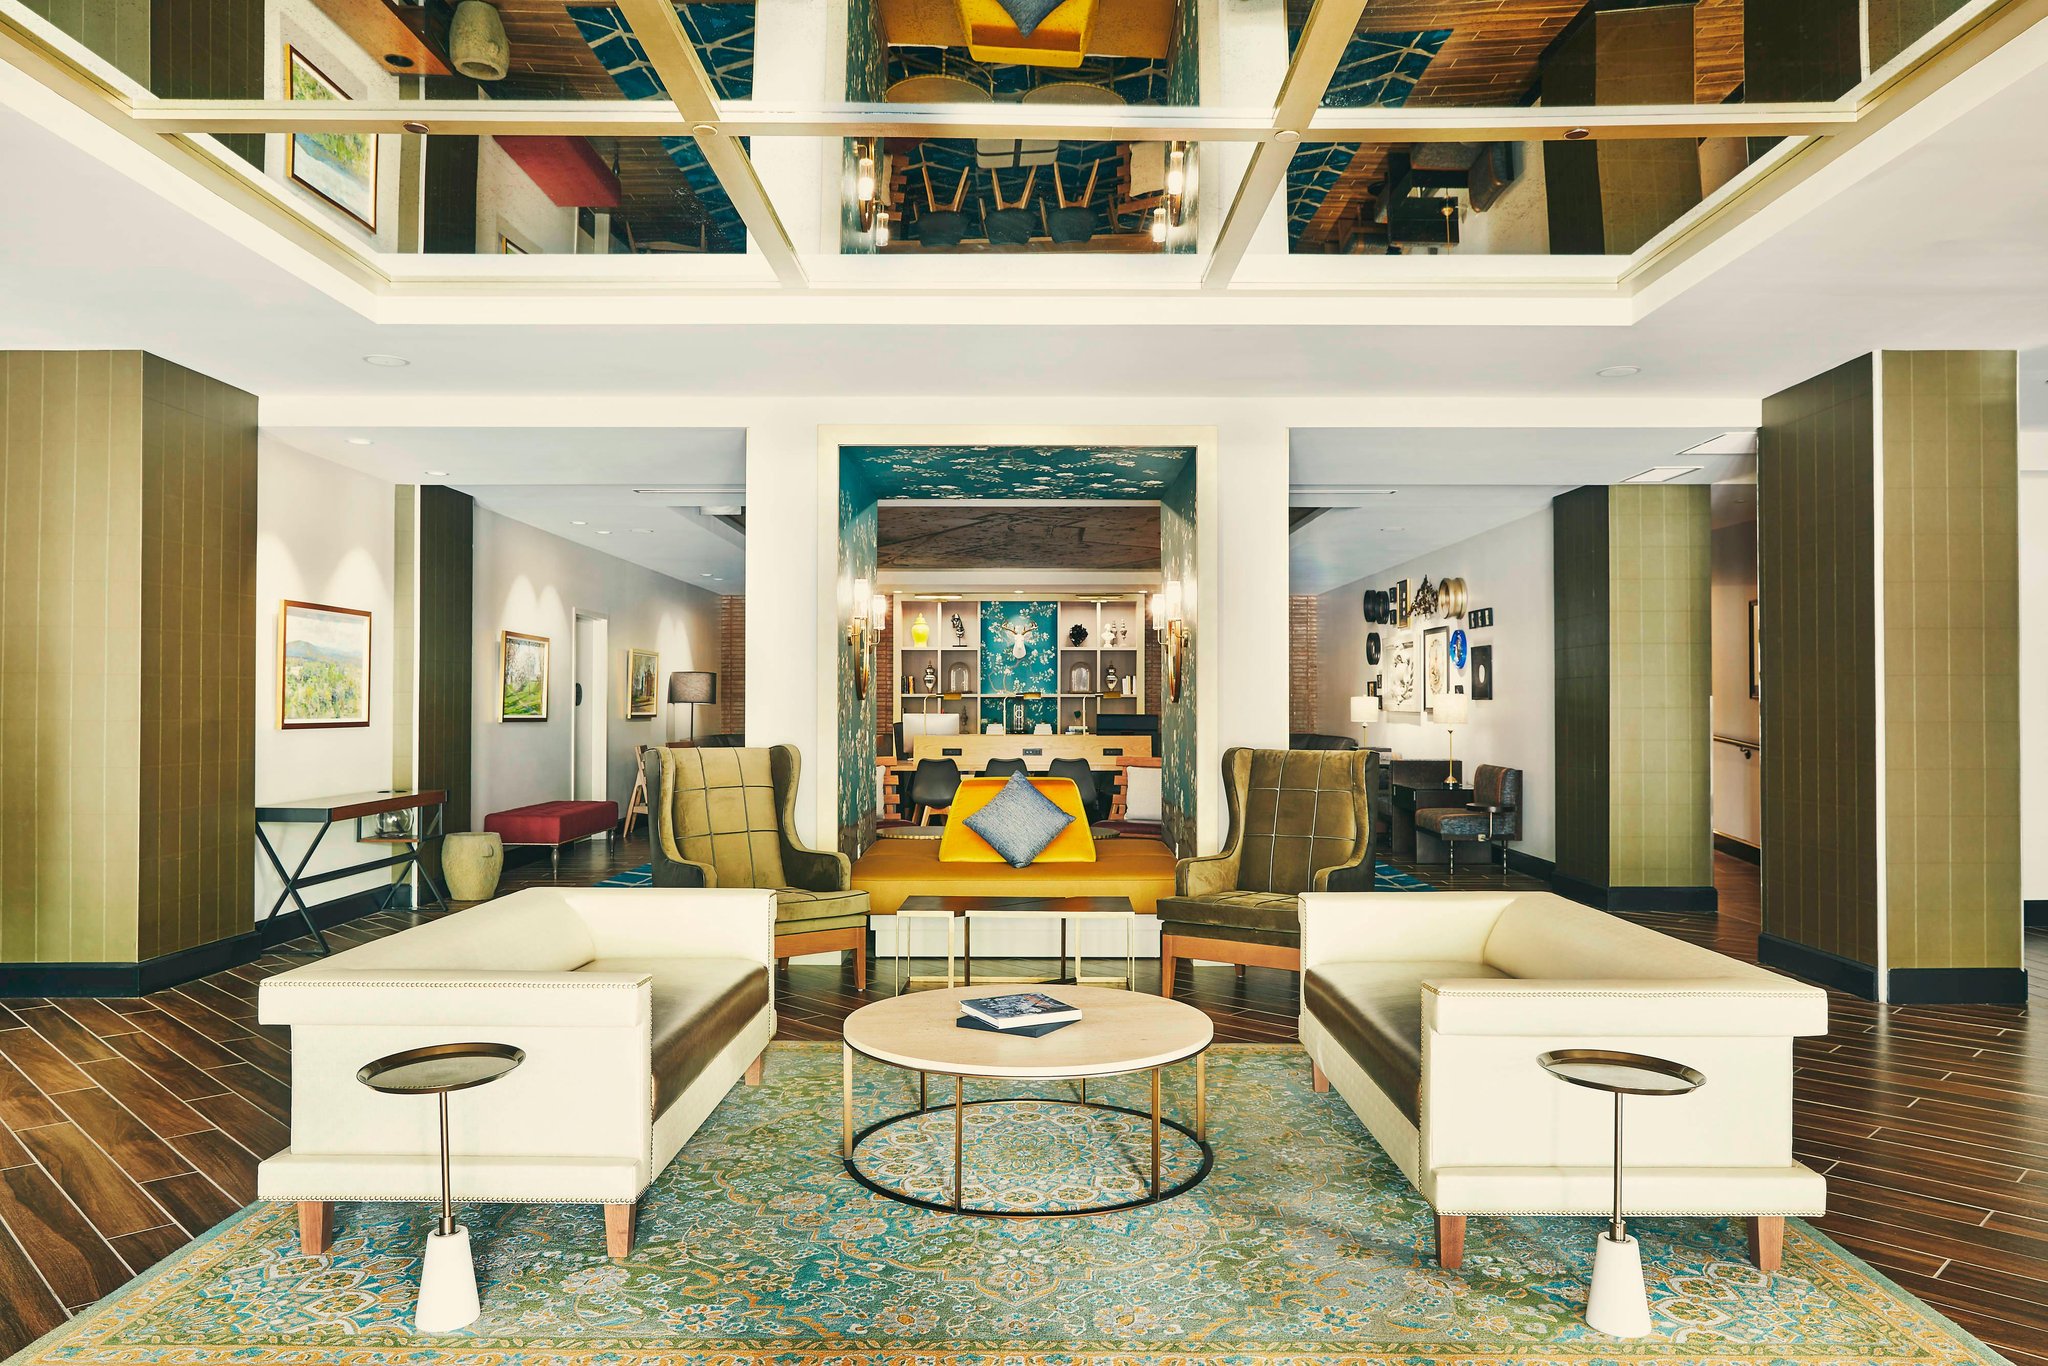 The Draftsman, Charlottesville, University, Autograph Collection Hotel